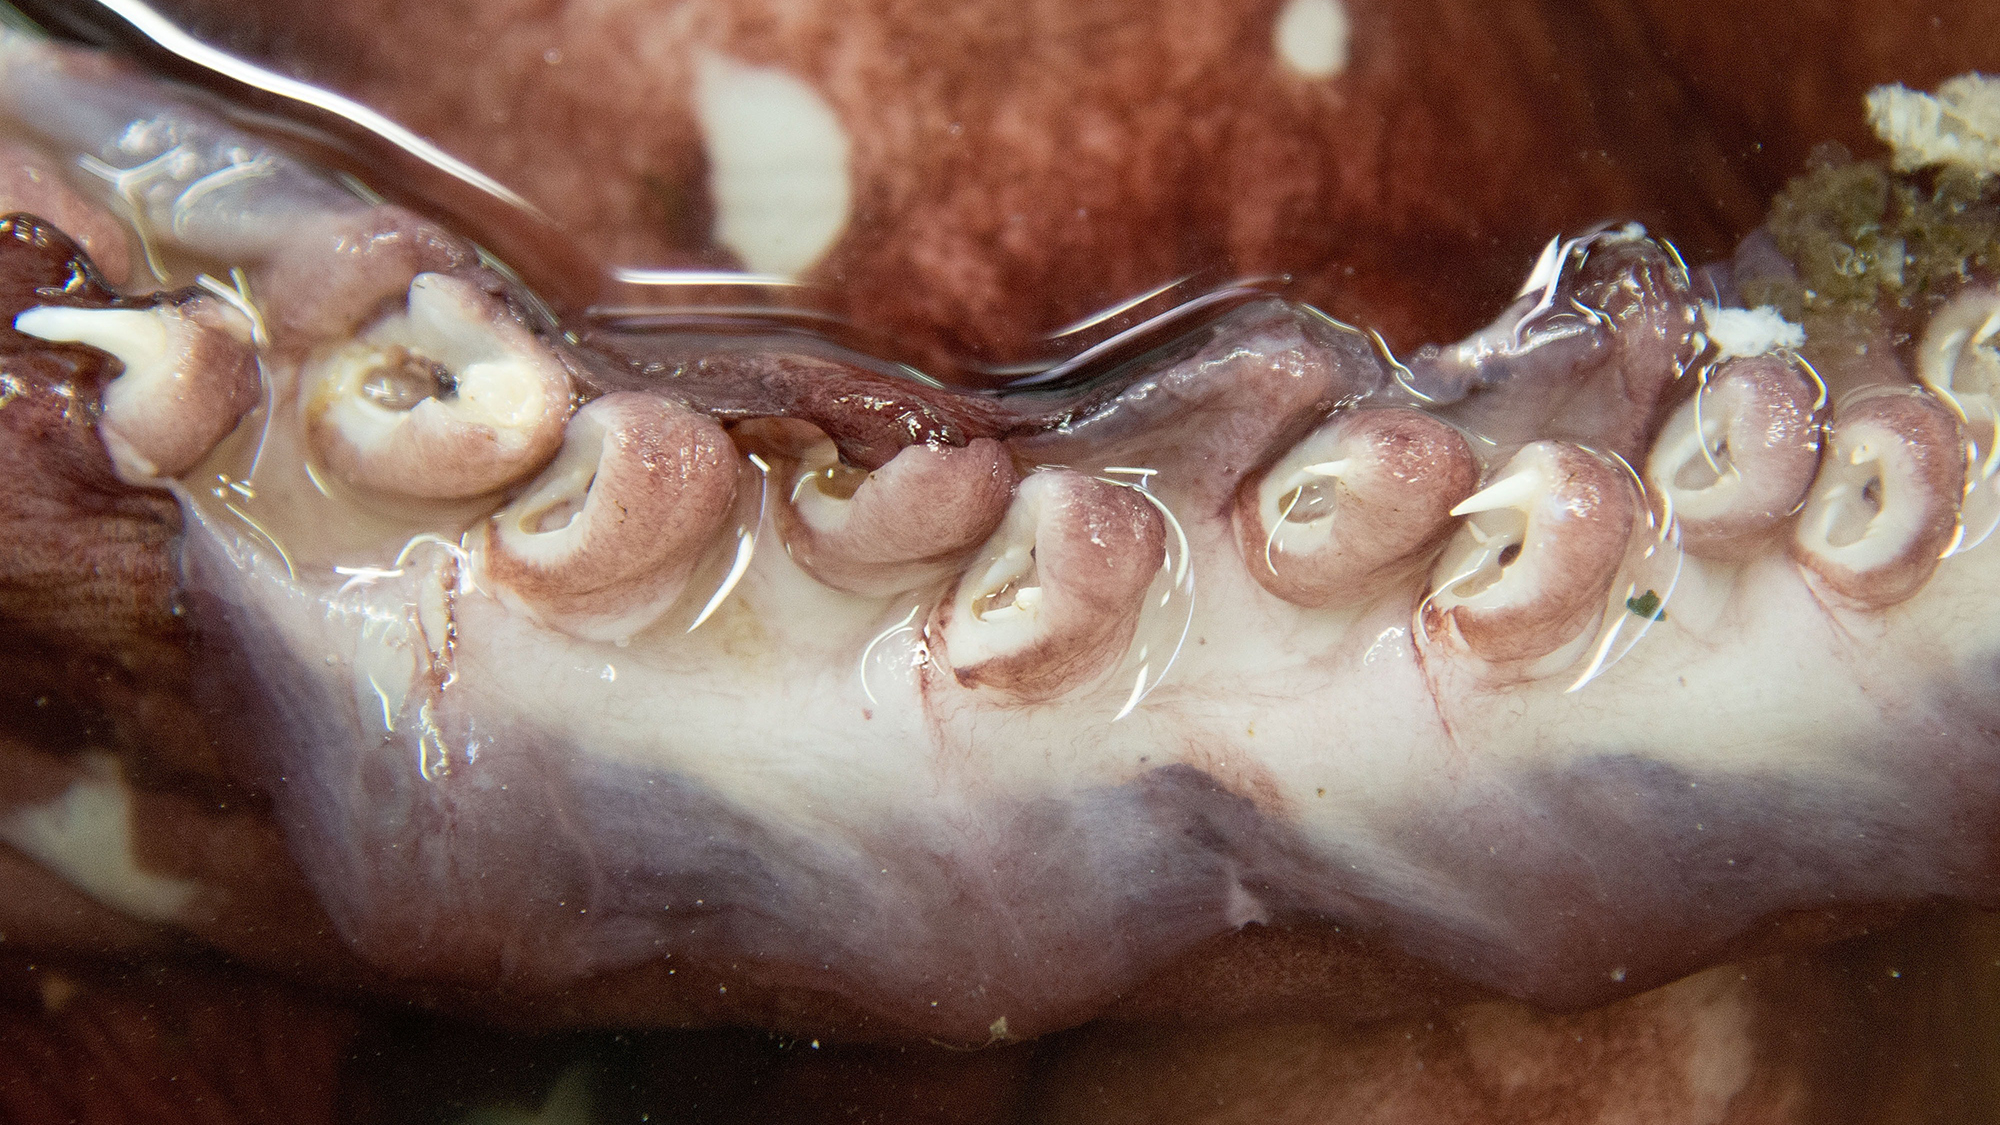 While scientists have seen colossal squid before—like this specimen examined by New Zealander researchers in 2014—their interactions have always been with animals that were either pulled from the depths, washed up on shore, or otherwise removed from their natural habitat.